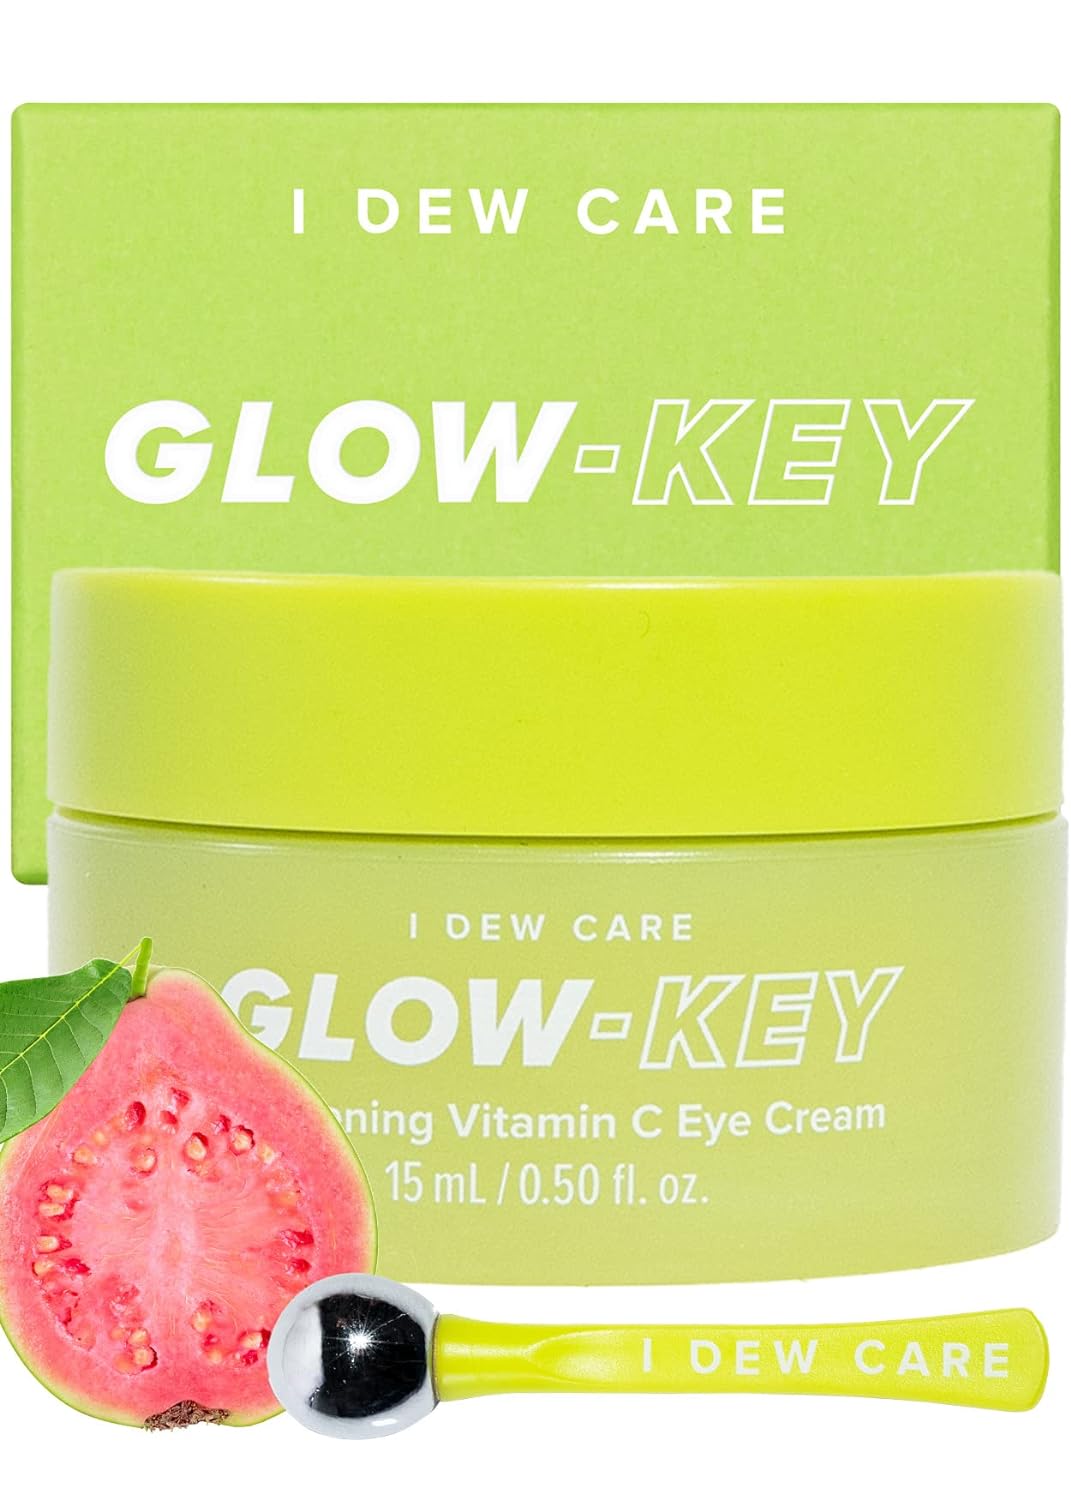 I DEW CARE Eye Cream with Applicator - Glow-Key | Guava Extract, Vitamin C, Hyluronic Acid & Niacinamide for Dark Circles & Puffiness, Gift, Under eye treatment, Brightening & Hydrating, 0.50